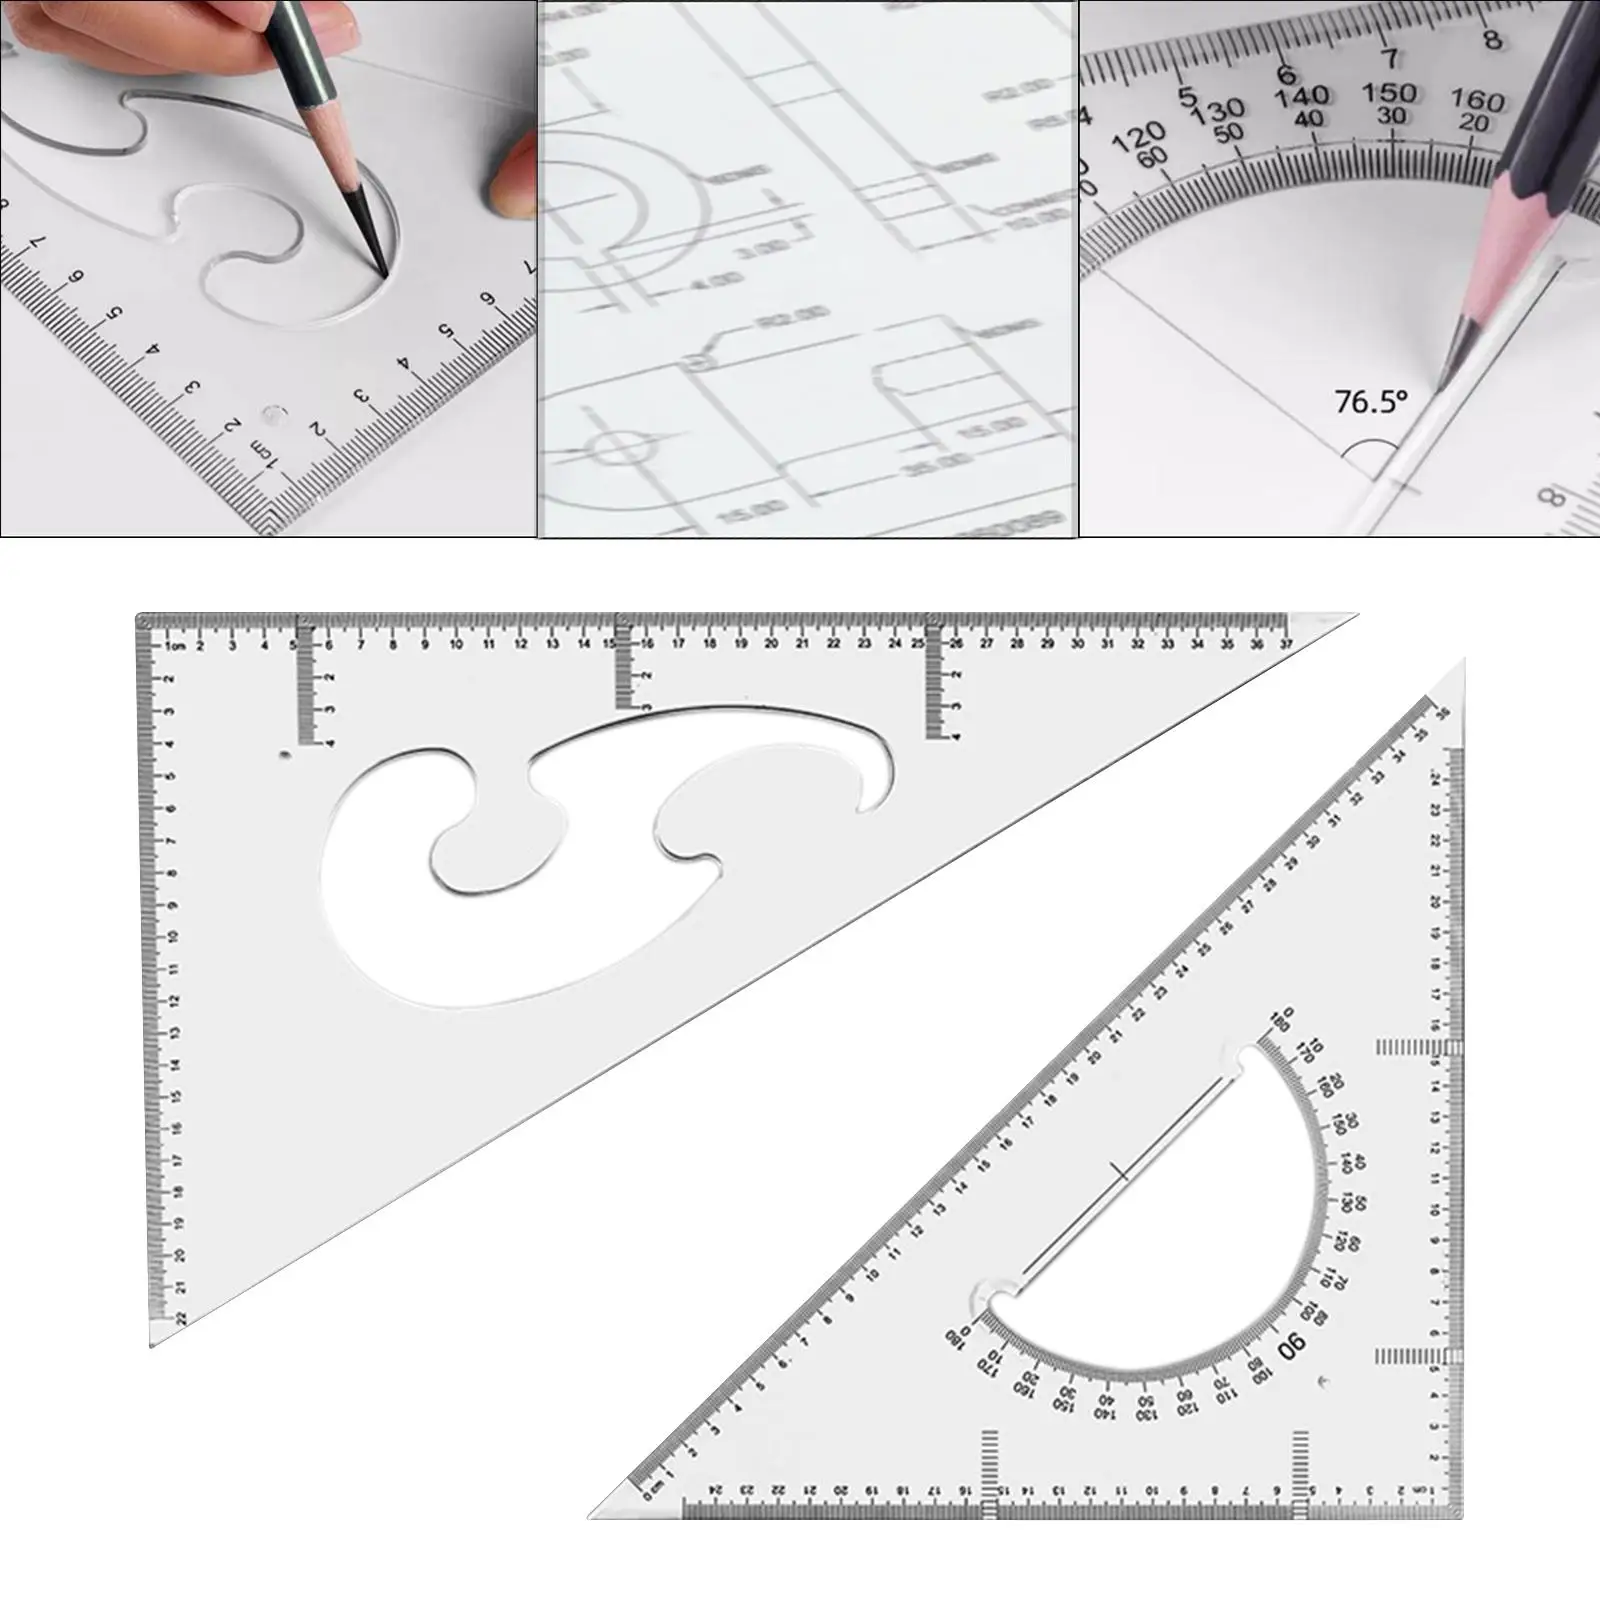 2 Pieces Triangle Ruler Square Accuracy Durable Multifunctional Measuring Tool for Architect Designer Carpentry Engineer Artists